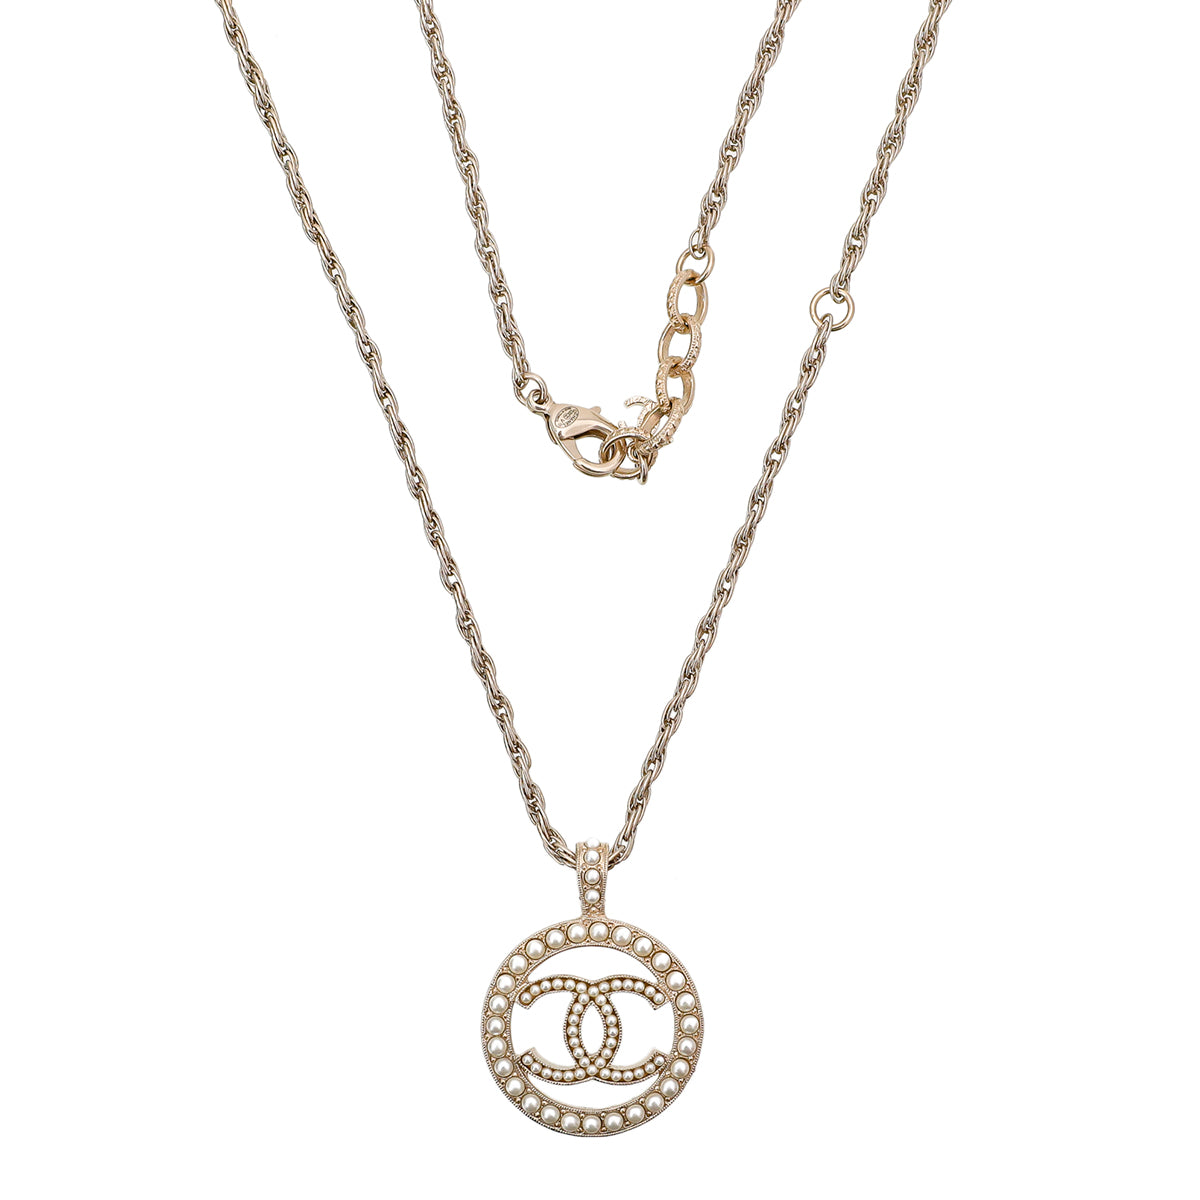 Chanel chanel necklace cc gold | ShopLook